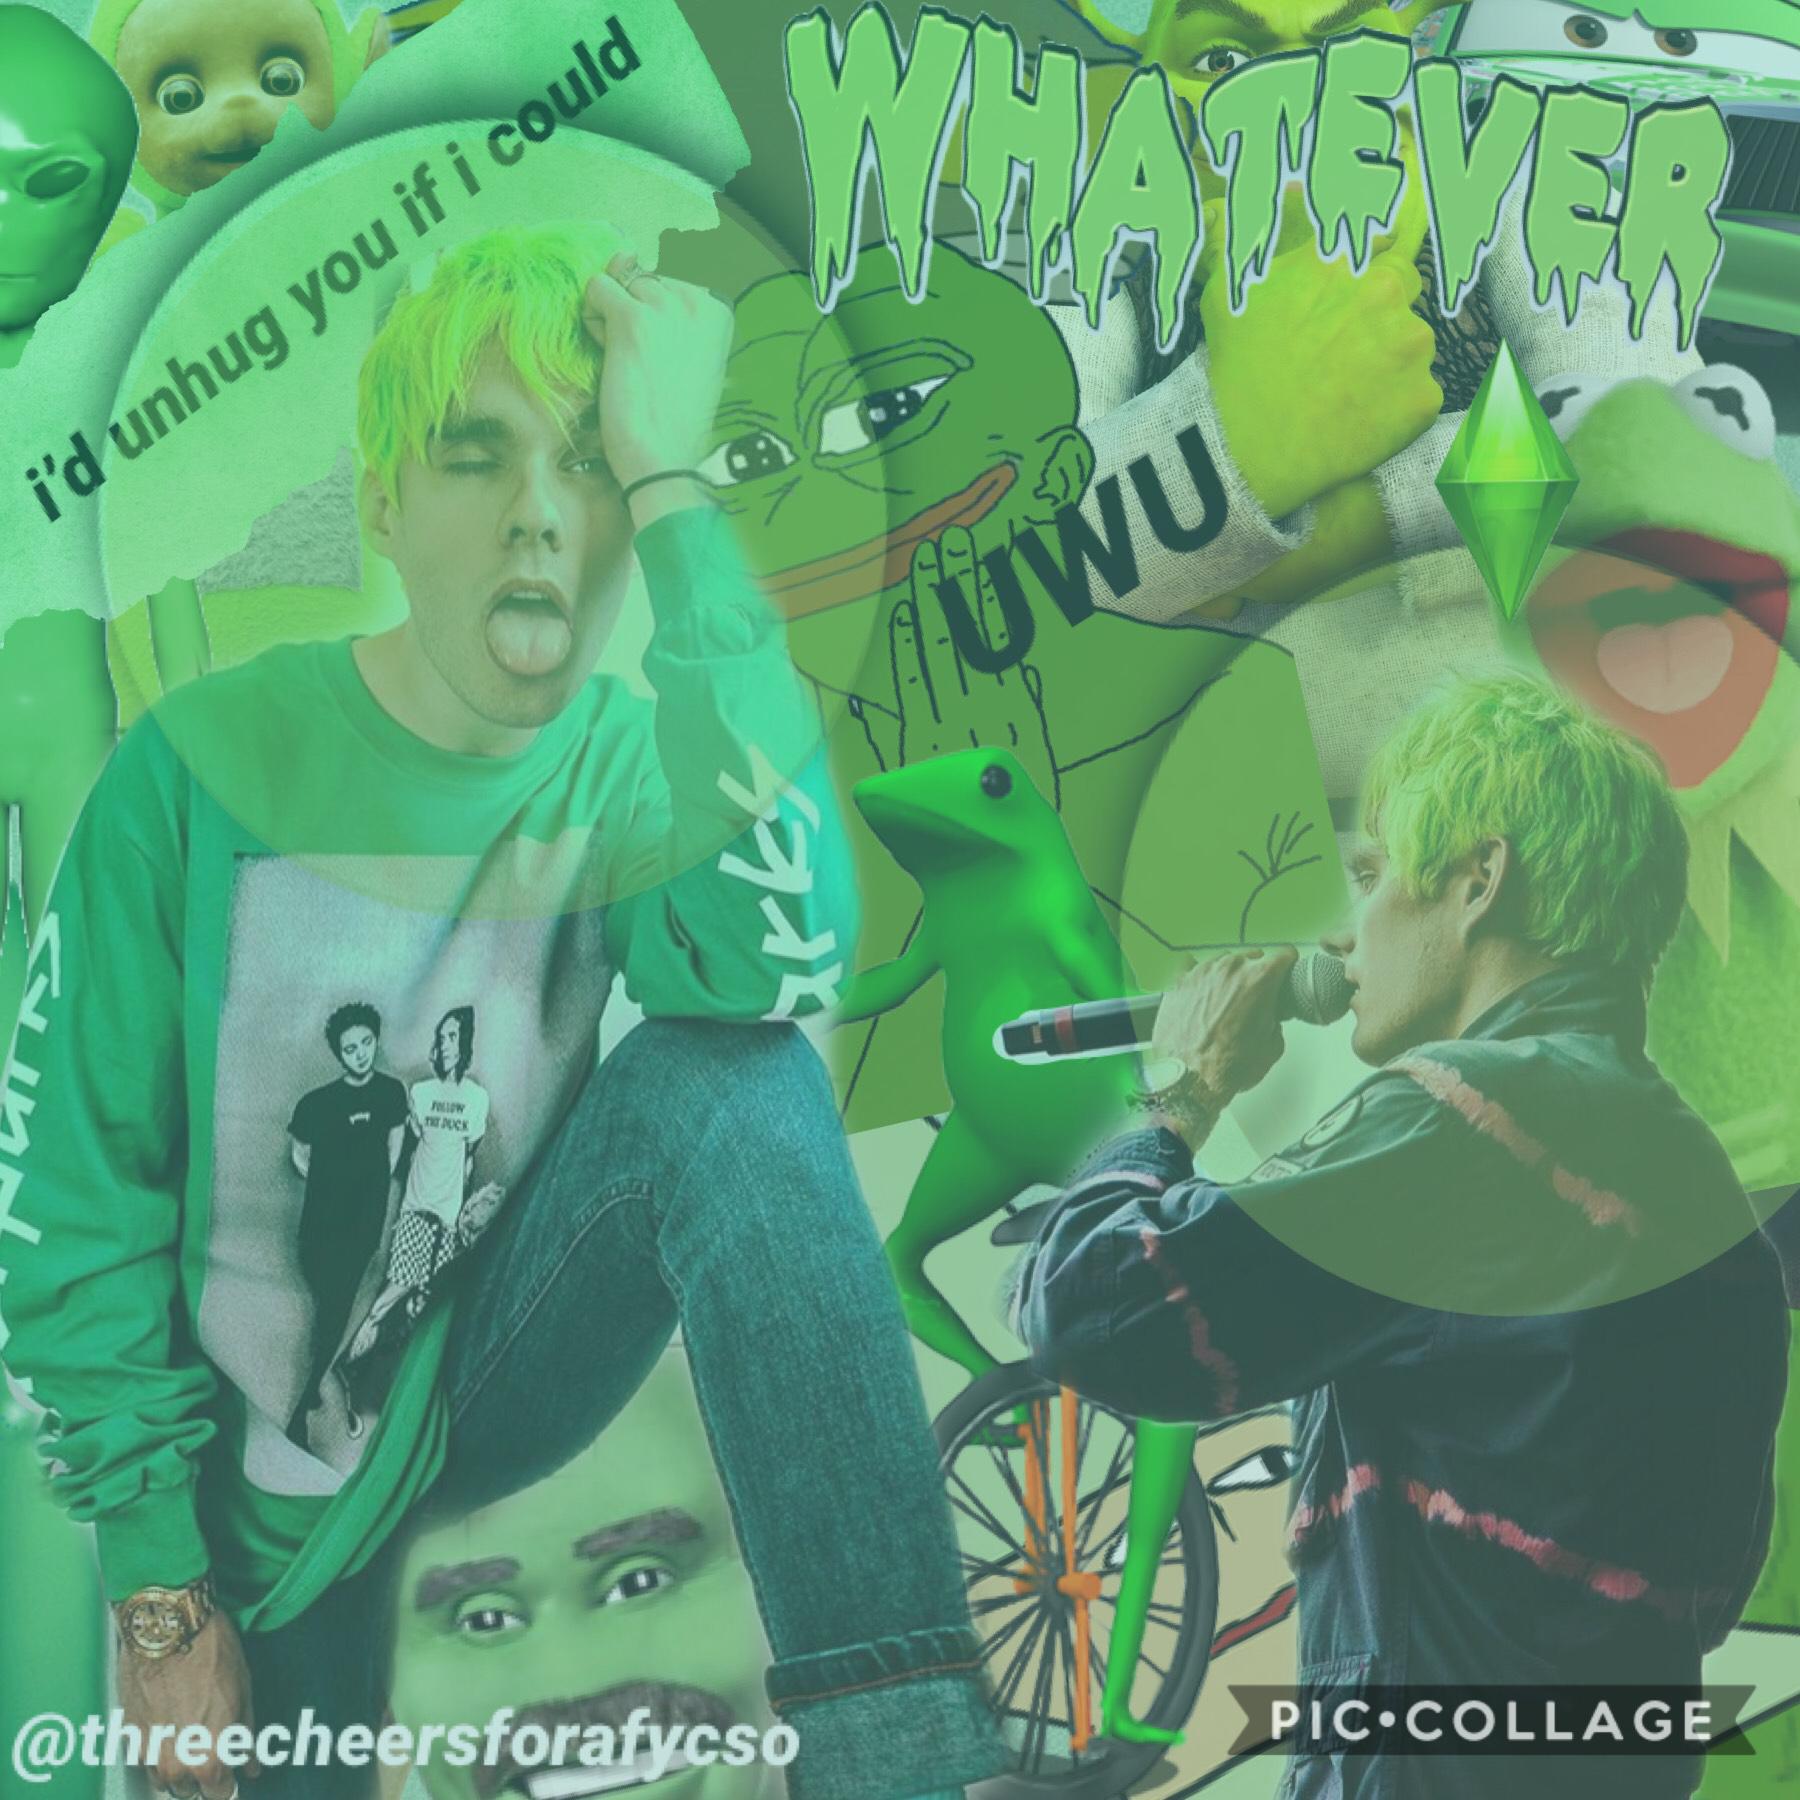 awsten is so babey🥺 
i have now become a full fob stan. jesus i love them so much. drop your favorite fob song (i know this has nothing to do with parx but sjdj)